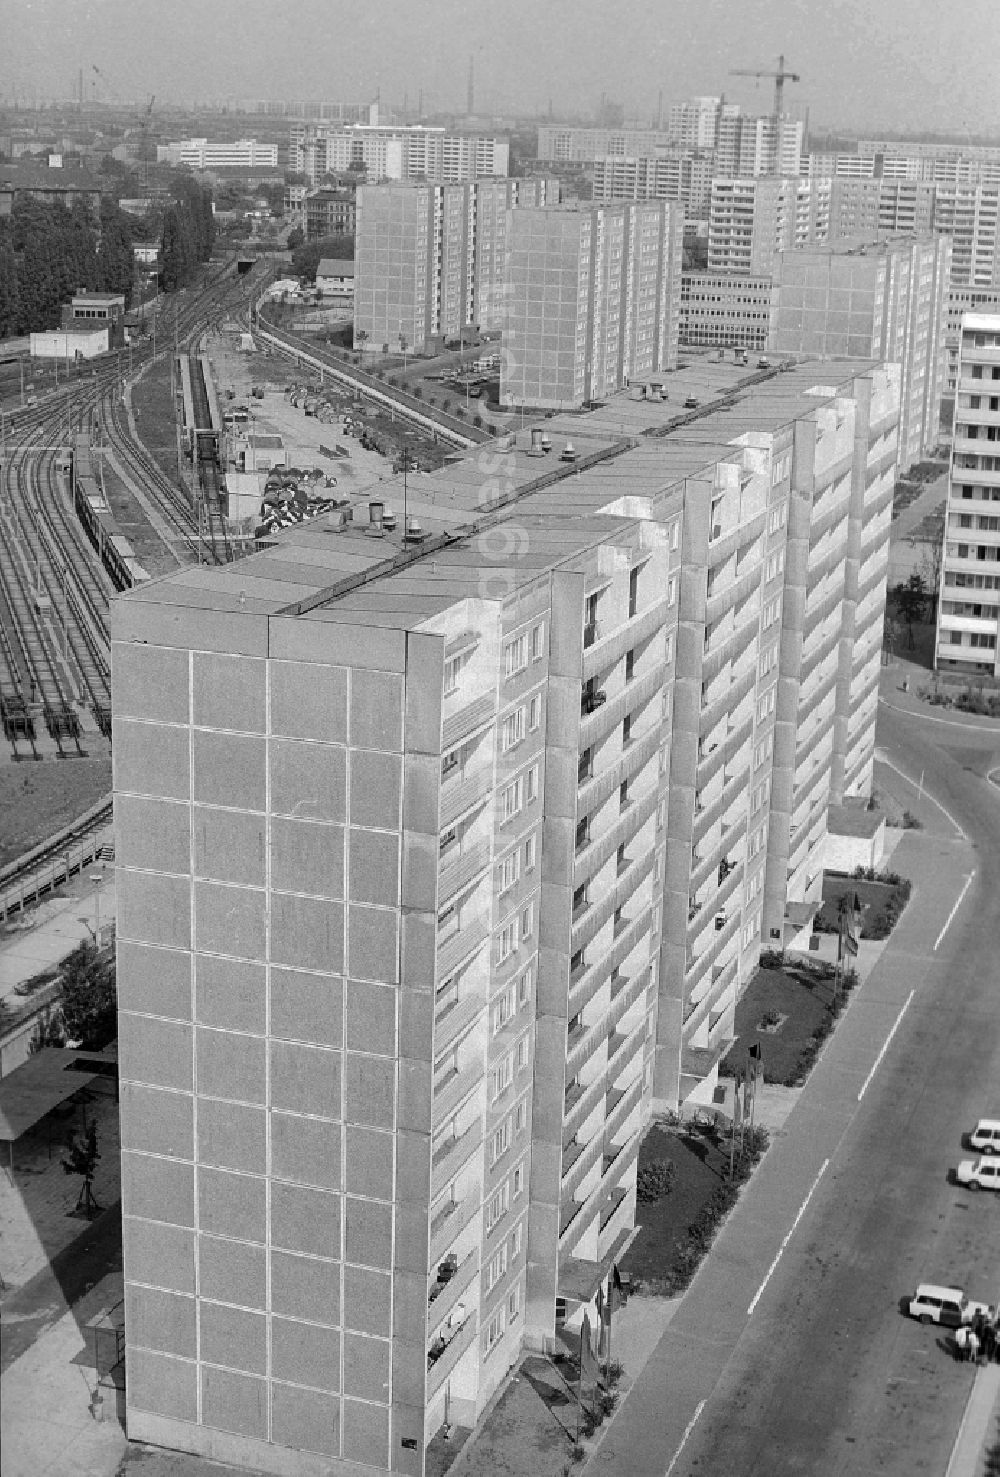 GDR photo archive: Berlin - View at the youth tourist's hotel Egon Schultz in the animal park in Berlin, the former capital of the GDR, German democratic republic